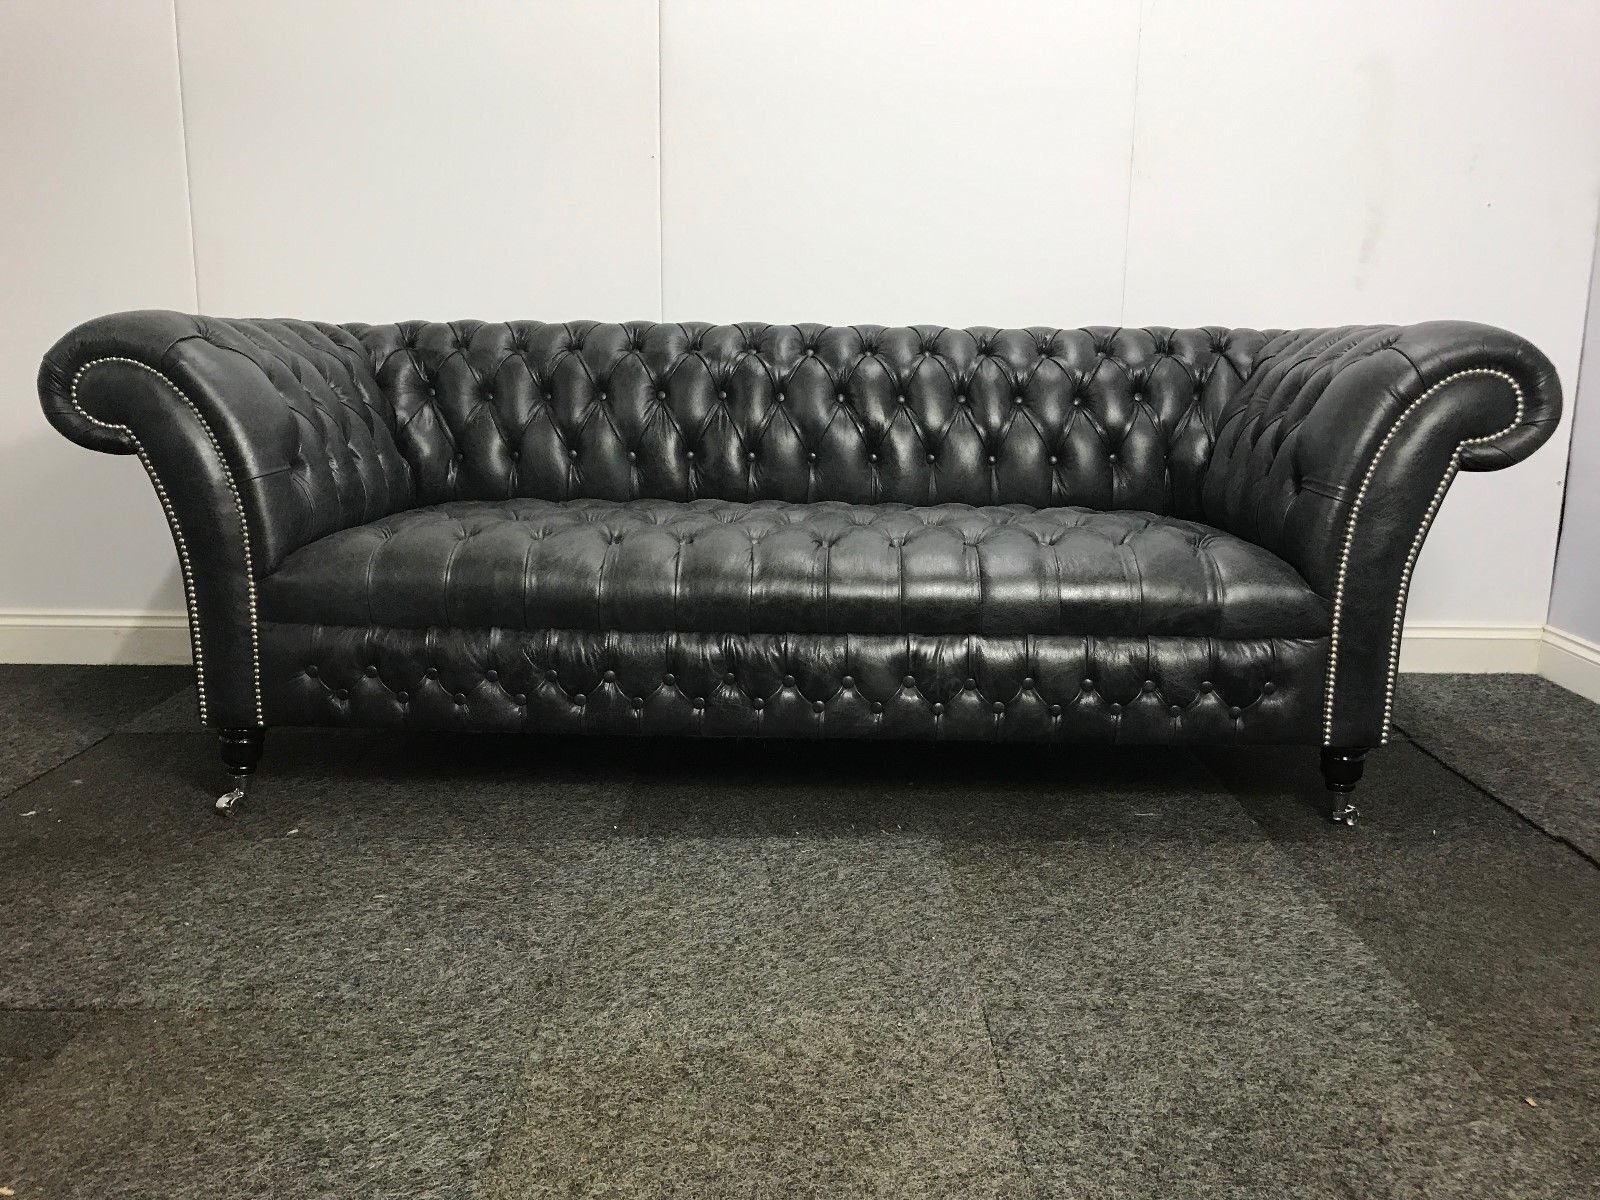 Sitz Vintage JVmoebel Teile, Made Luxus Original in Chesterfield-Sofa Leder Europa Couch Sofa 100% Sofort, 1 Chesterfield